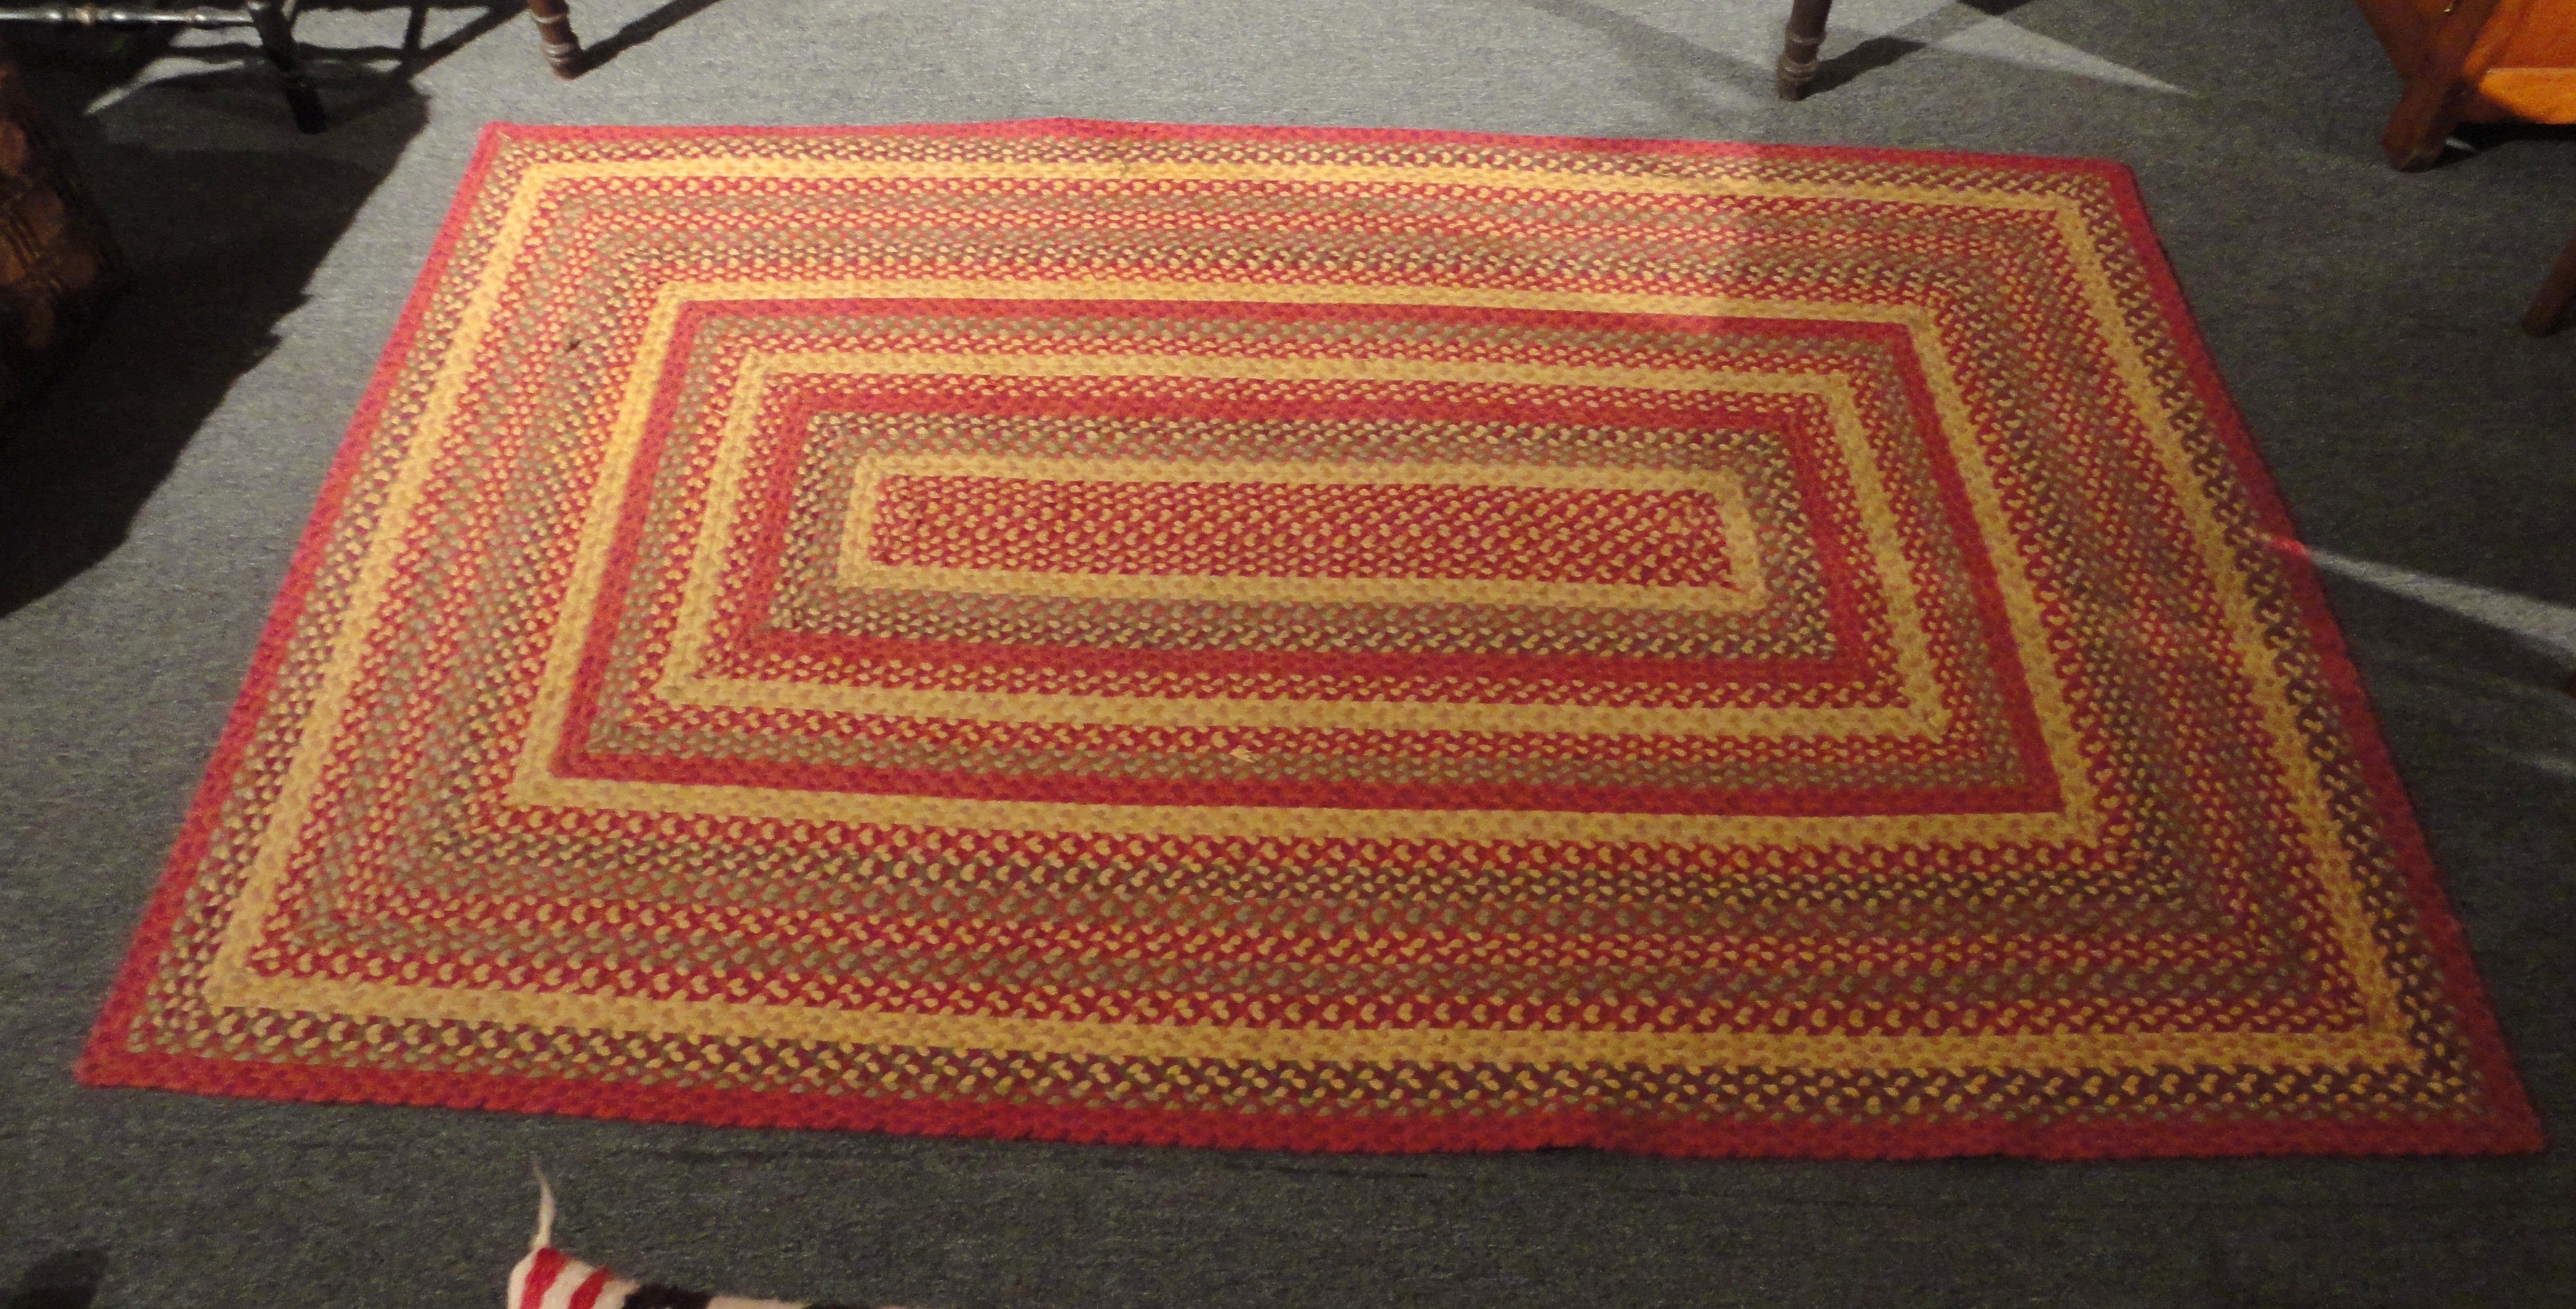 Fantastic Large Rectangular Braided Rug in Indian Sunset Colors